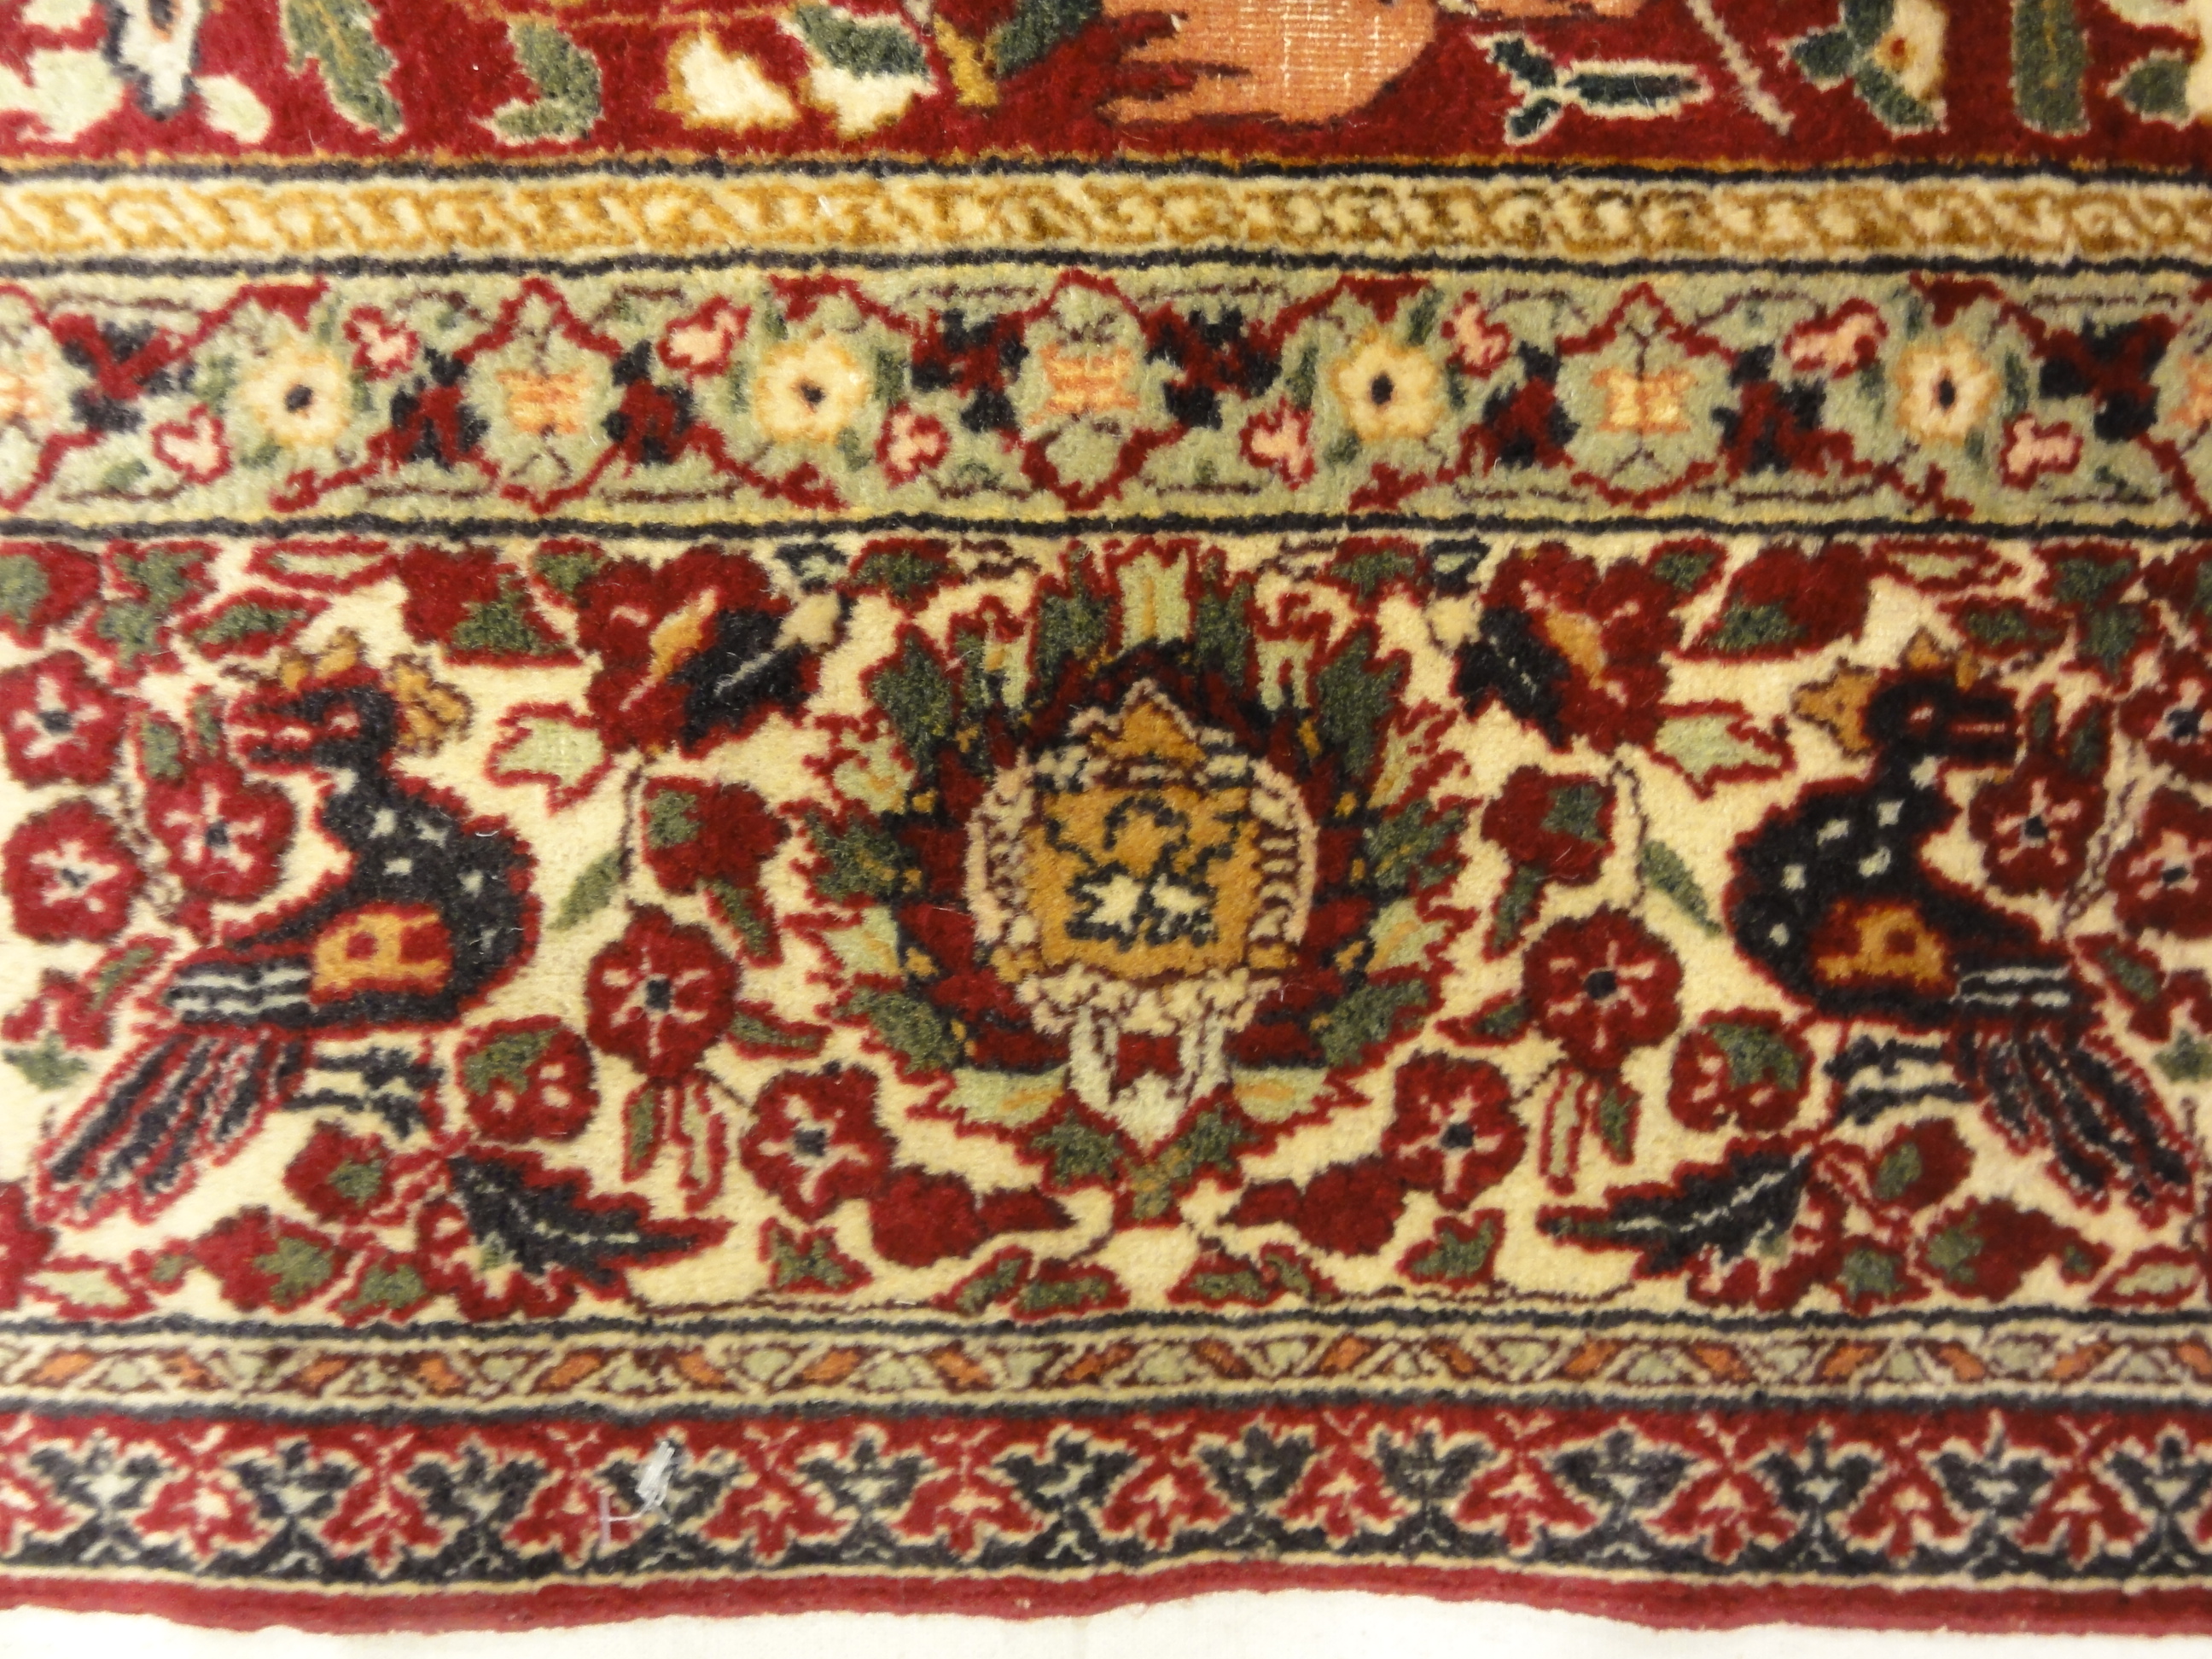 Antique Mughal Indian Emperial Rug. A piece of genuine authentic antique woven carpet art sold by Santa Barbara Design Center, Rugs and More.